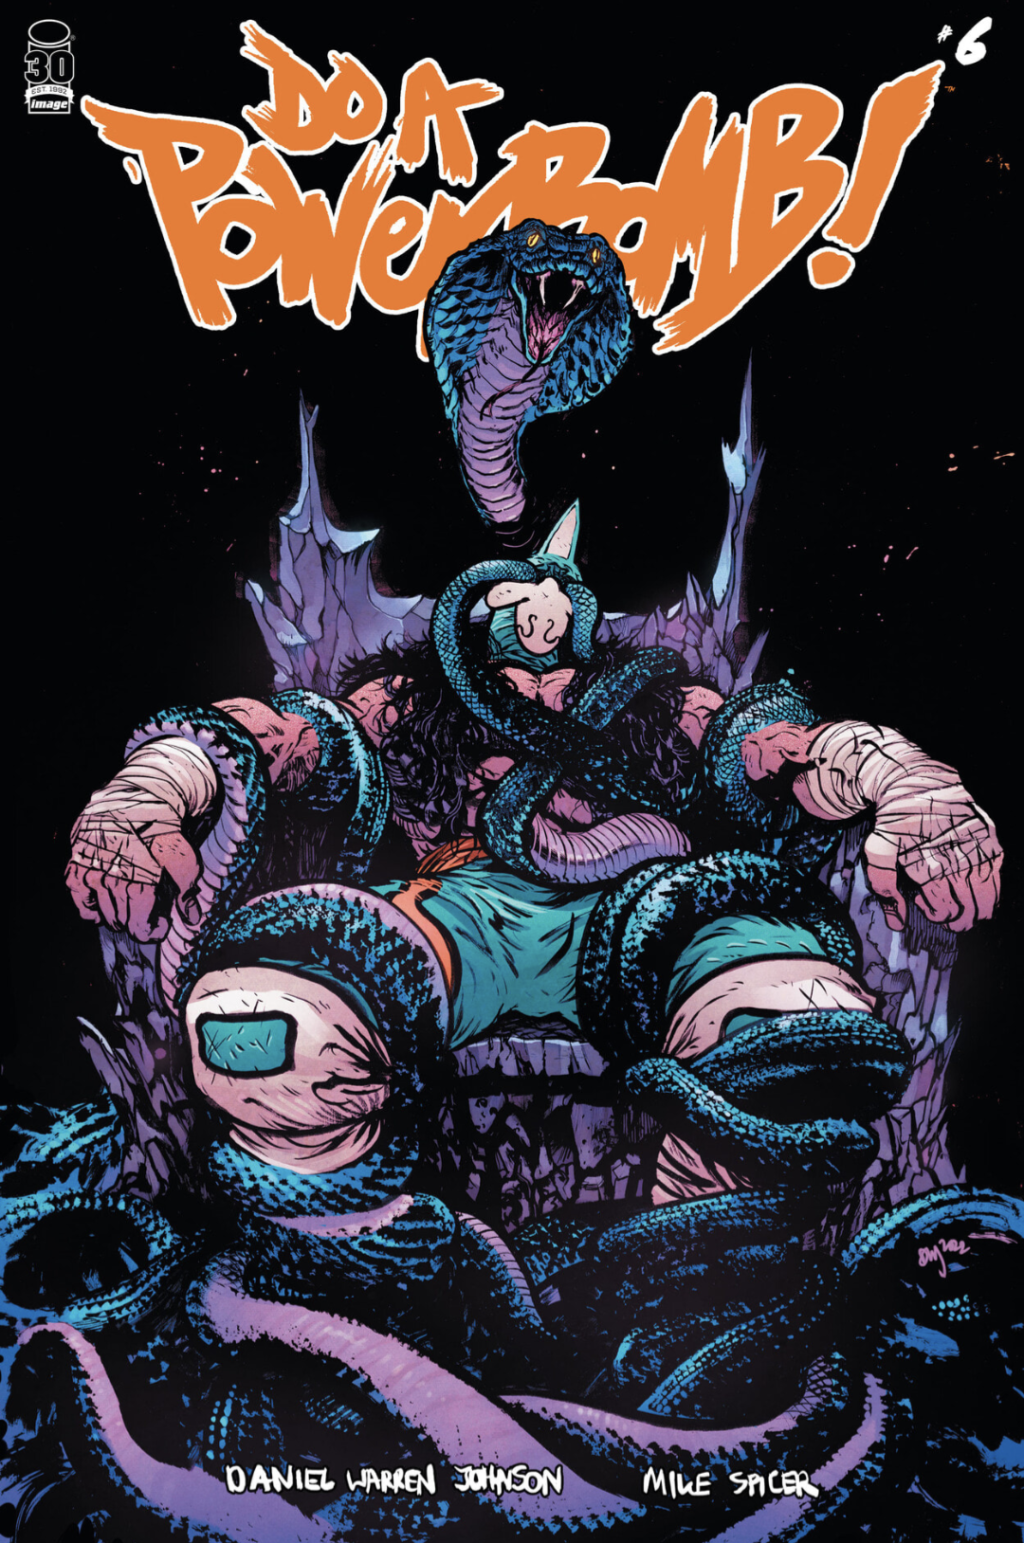 Comic Book Review: Do A Powerbomb #6